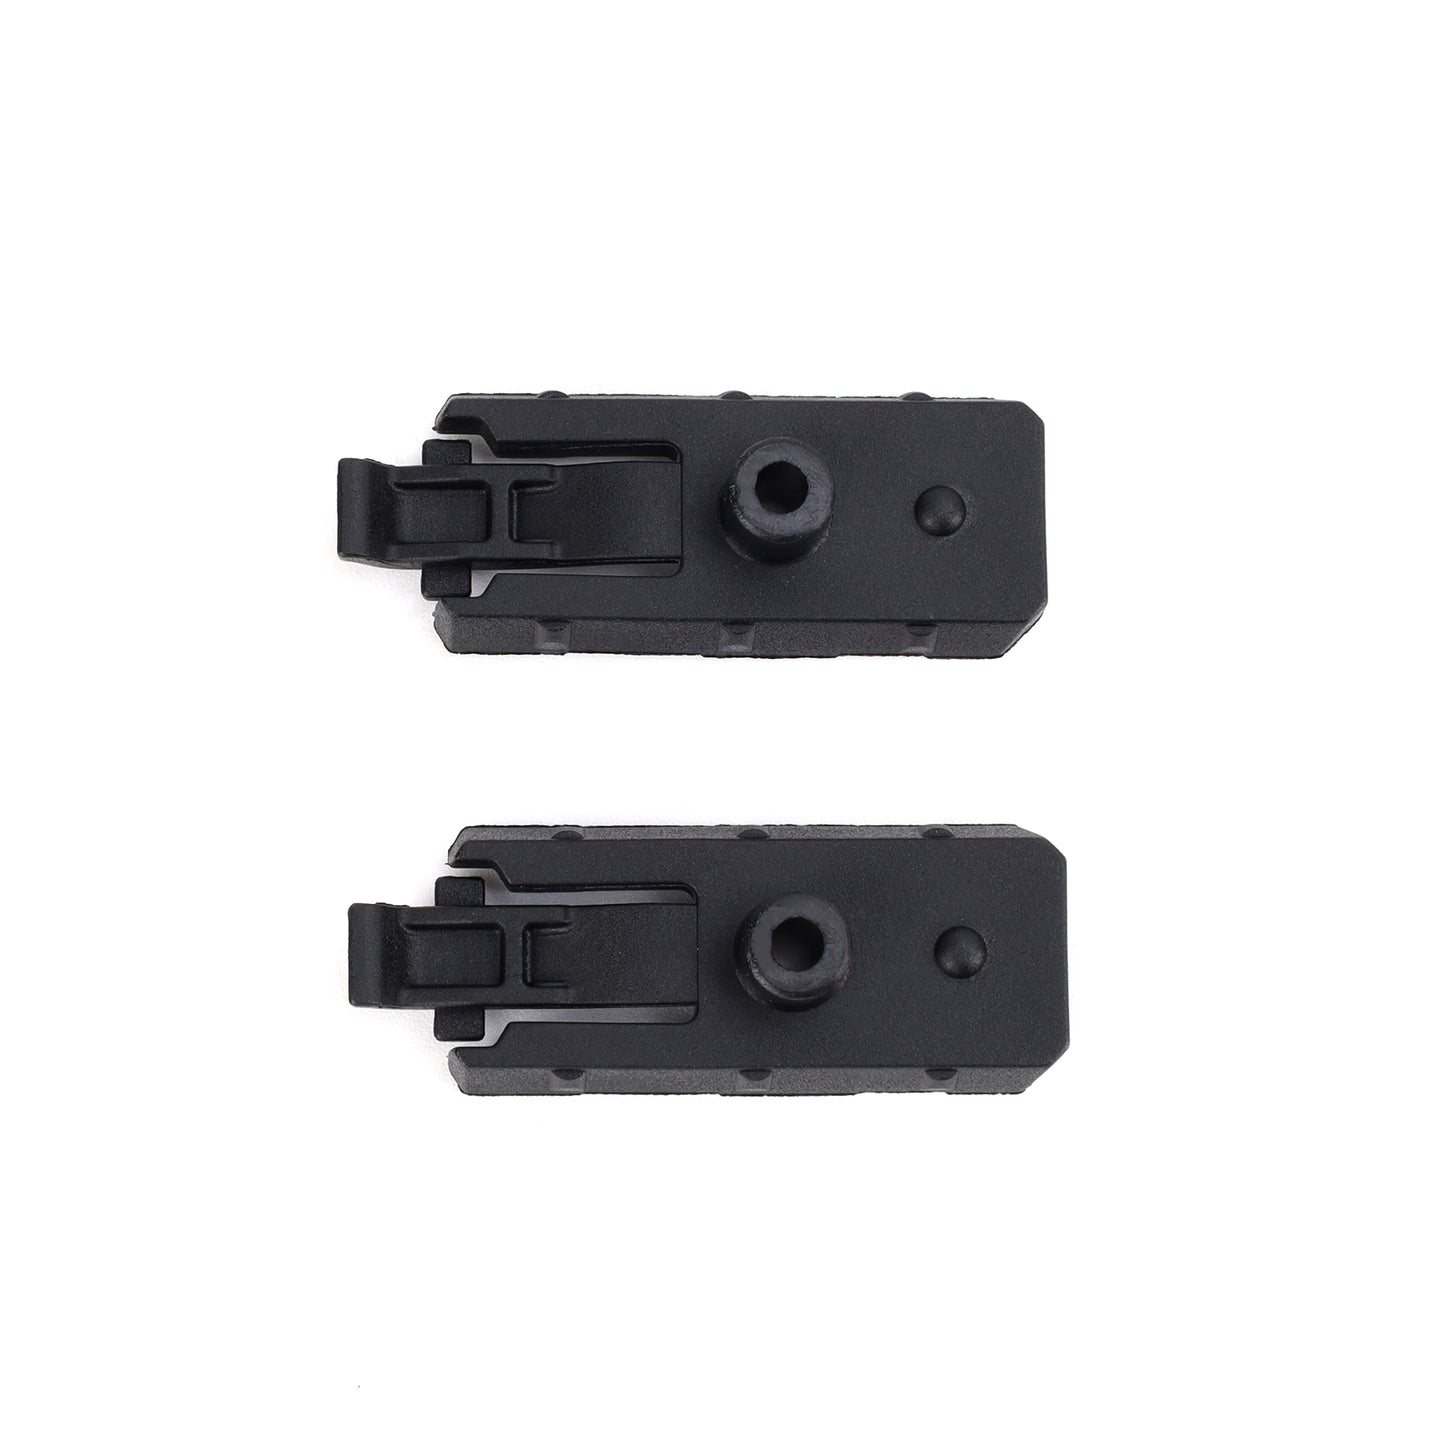 Replacement ARC Rail Helmet Dovetail Adapters for Ops-Core AMP Headset